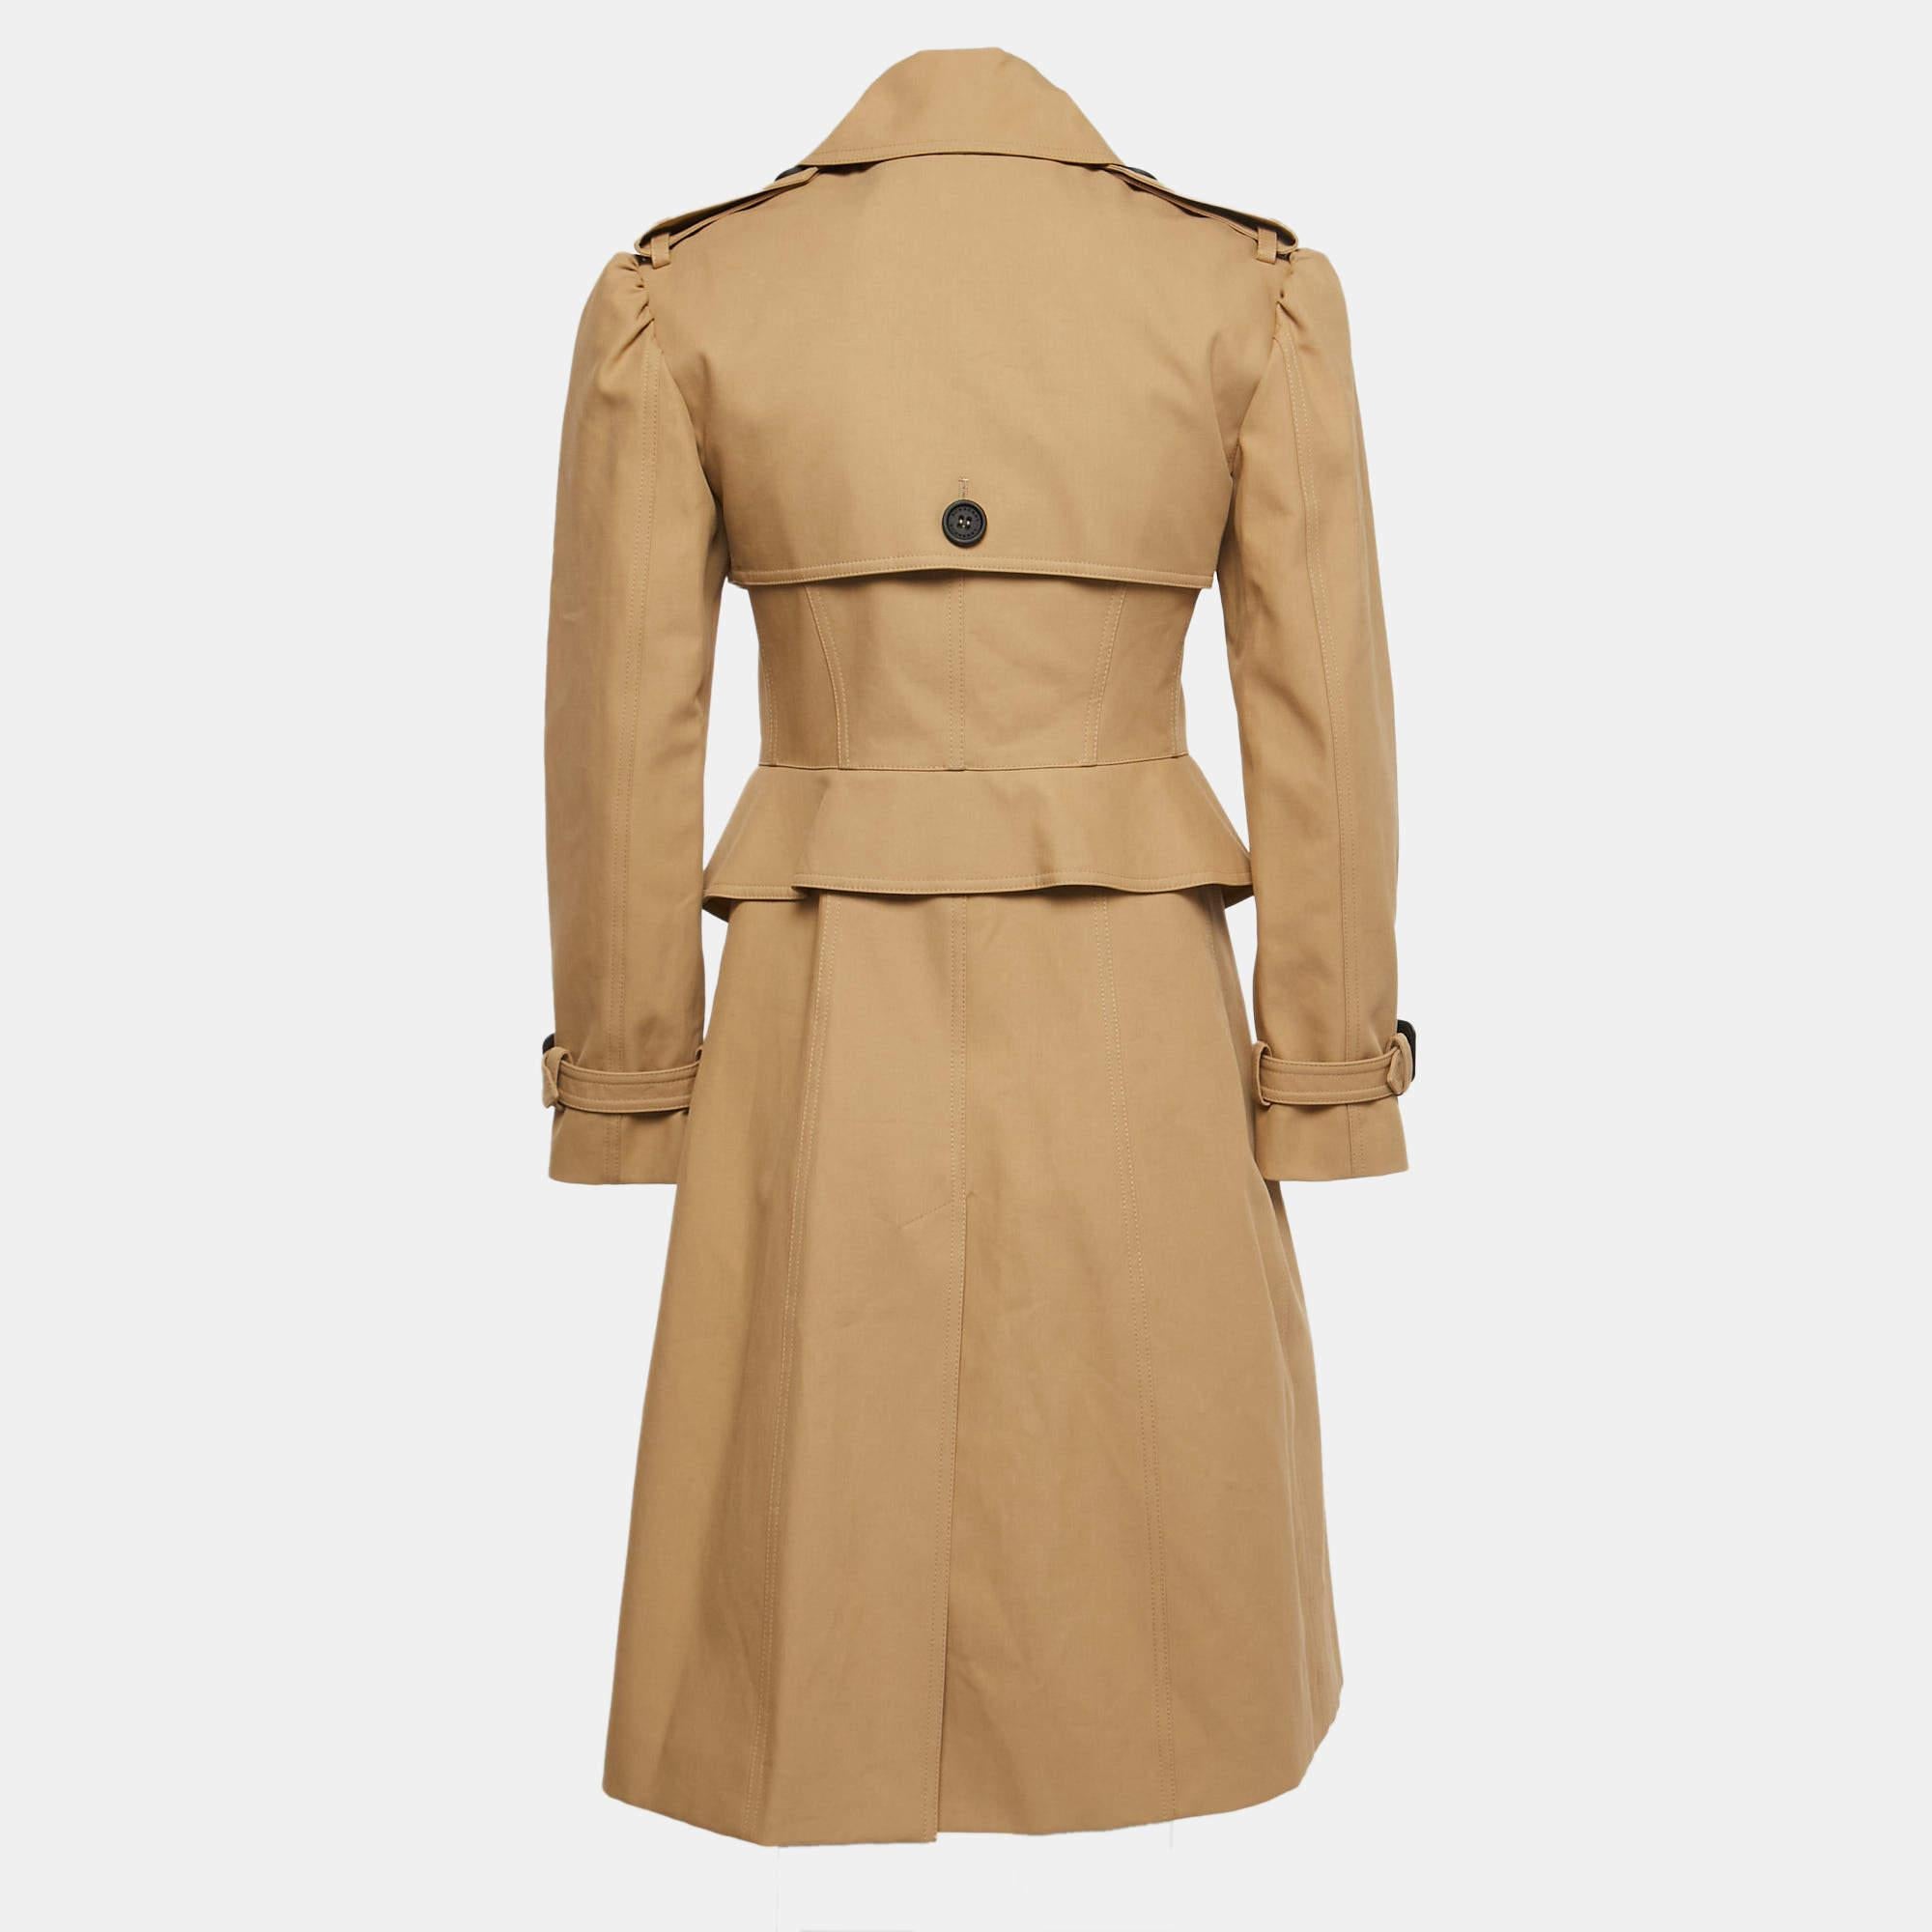 The Burberry trench coat is an iconic fashion staple. Crafted from durable gabardine fabric, it features a classic double-breasted design, signature check lining, adjustable belt, and versatile beige hue. This timeless piece combines style and